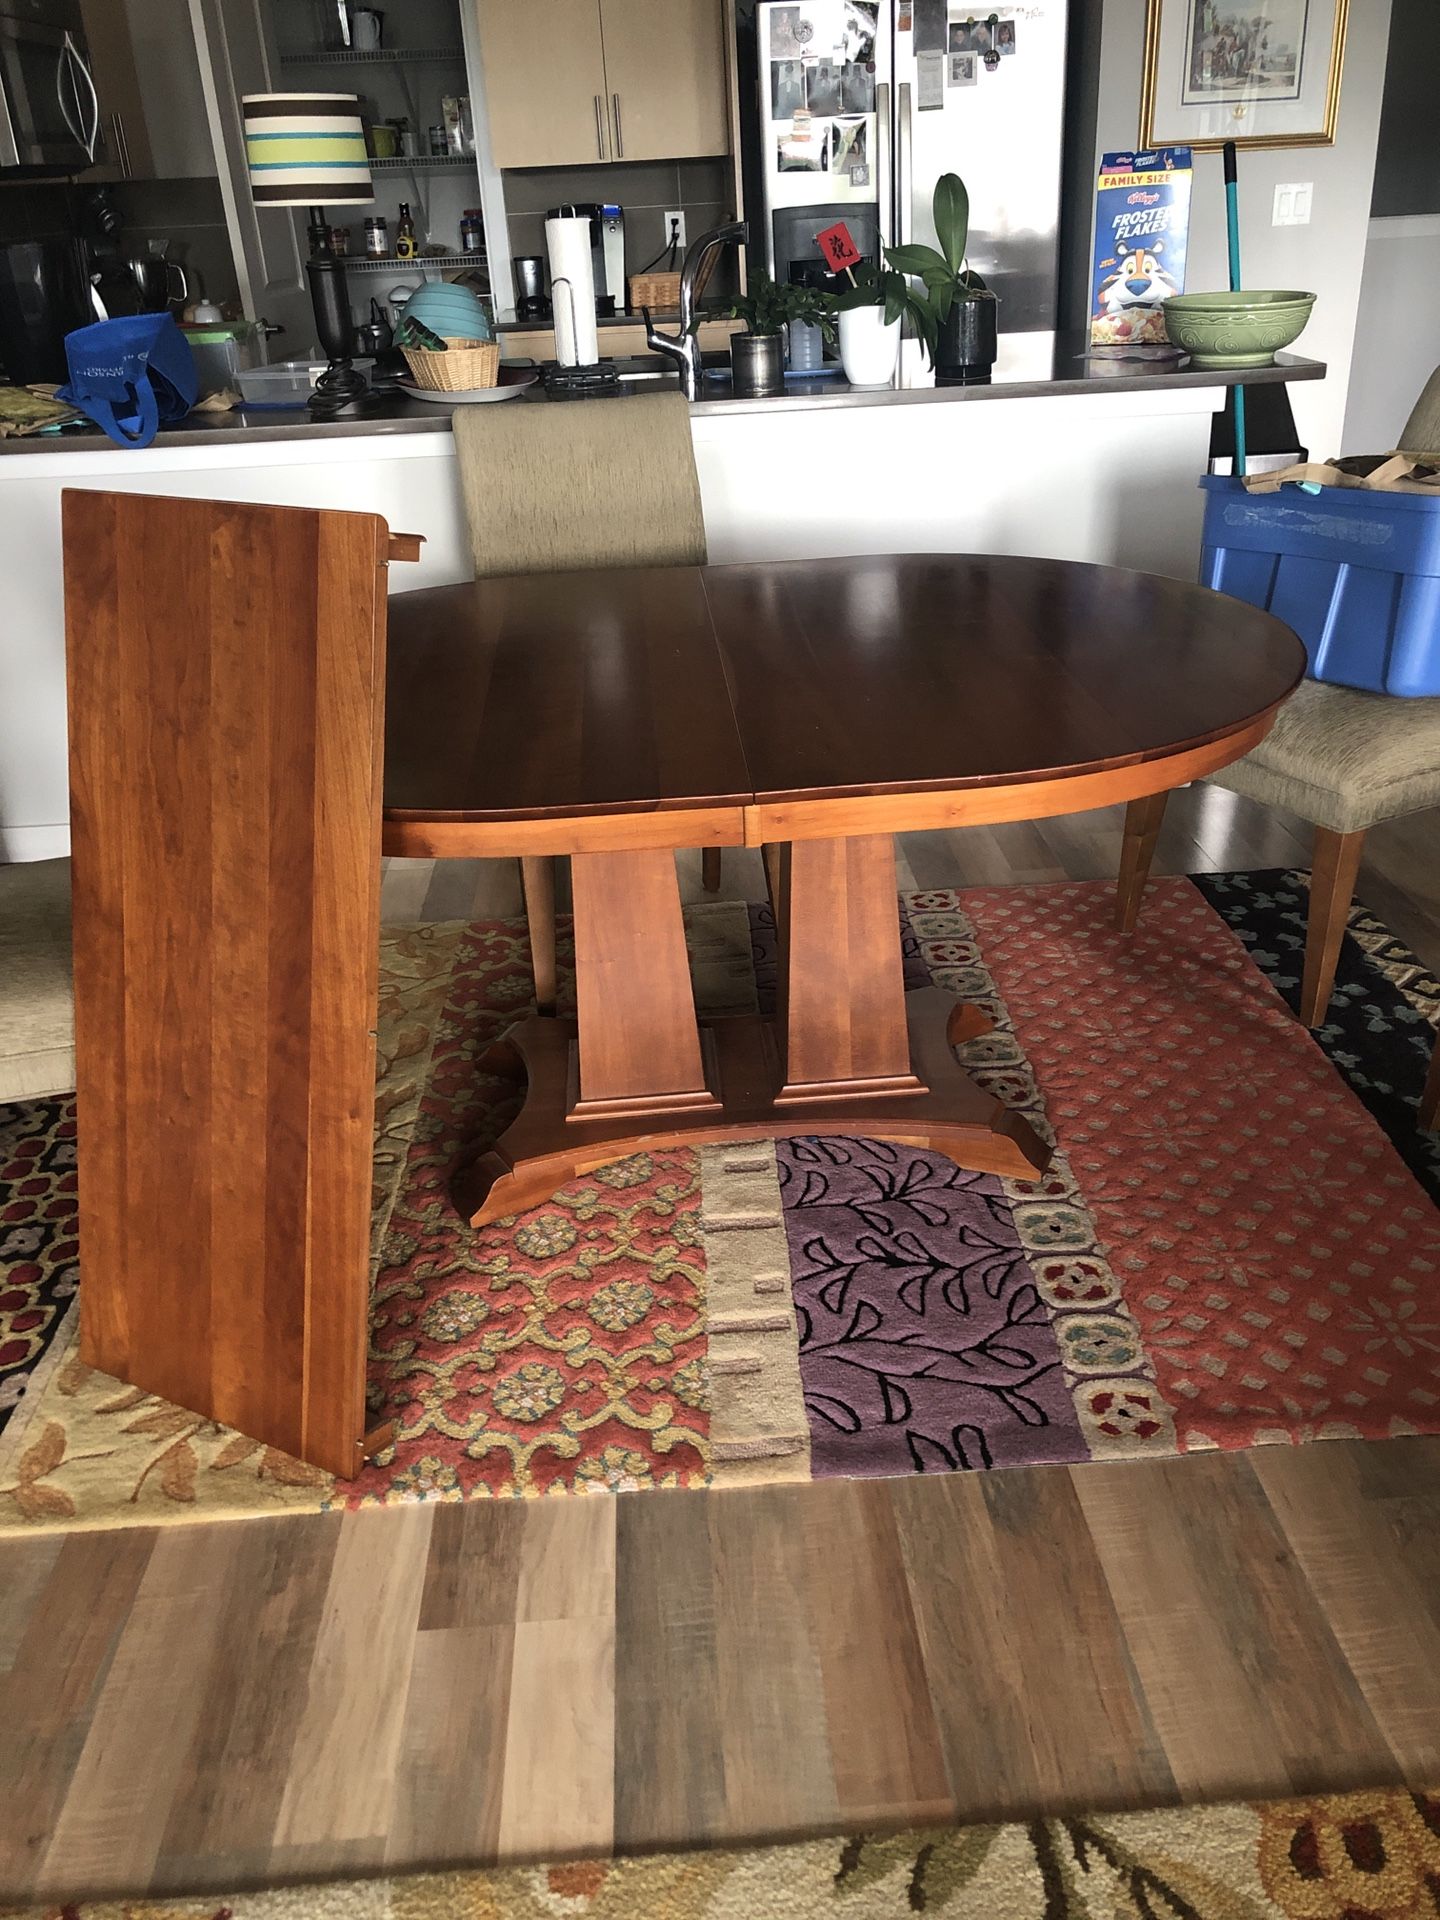 Dining table with leaf